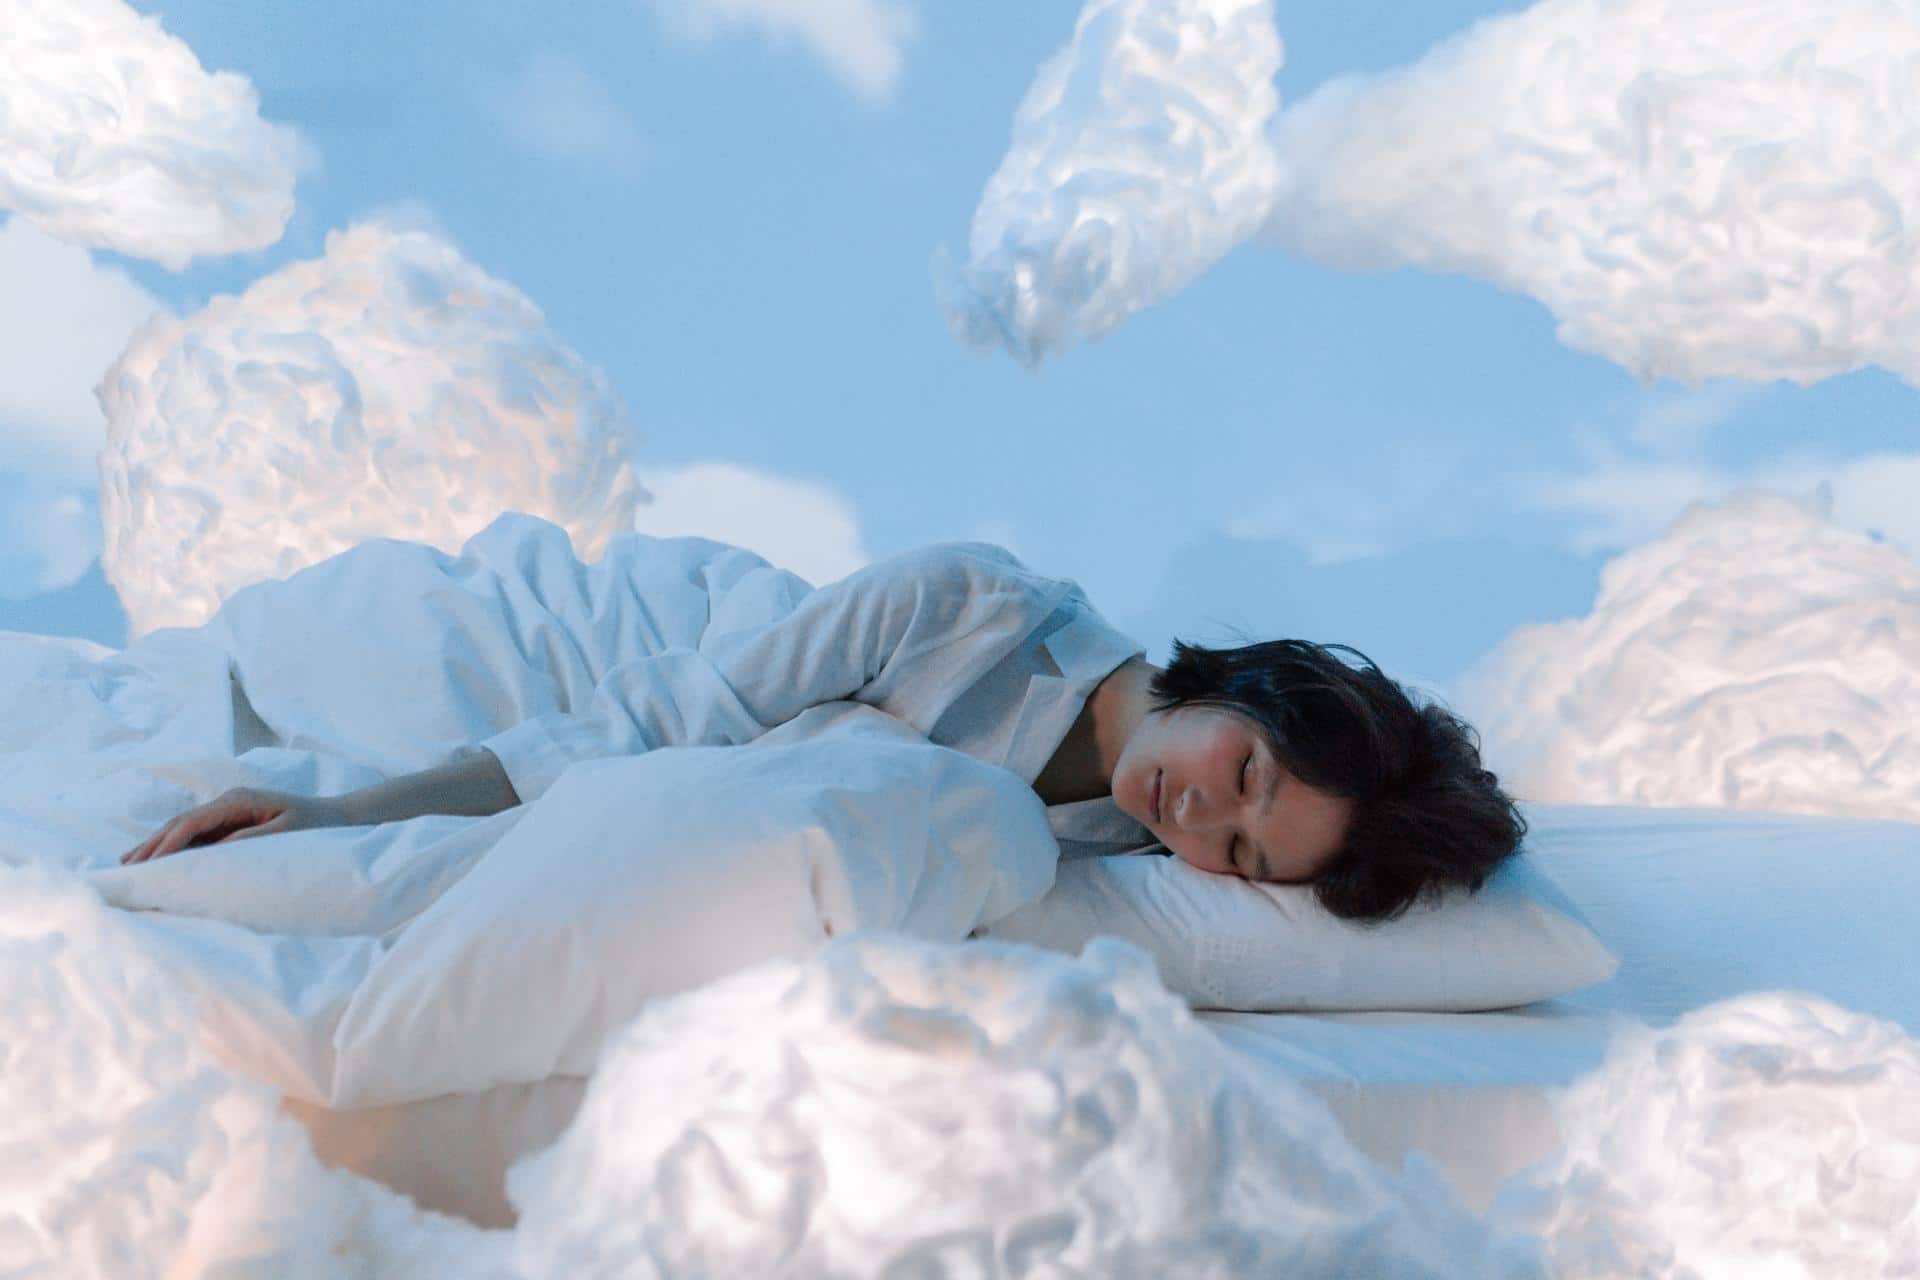 Creative image of a woman sleeping and dreaming among the clouds as one sleep cycle.